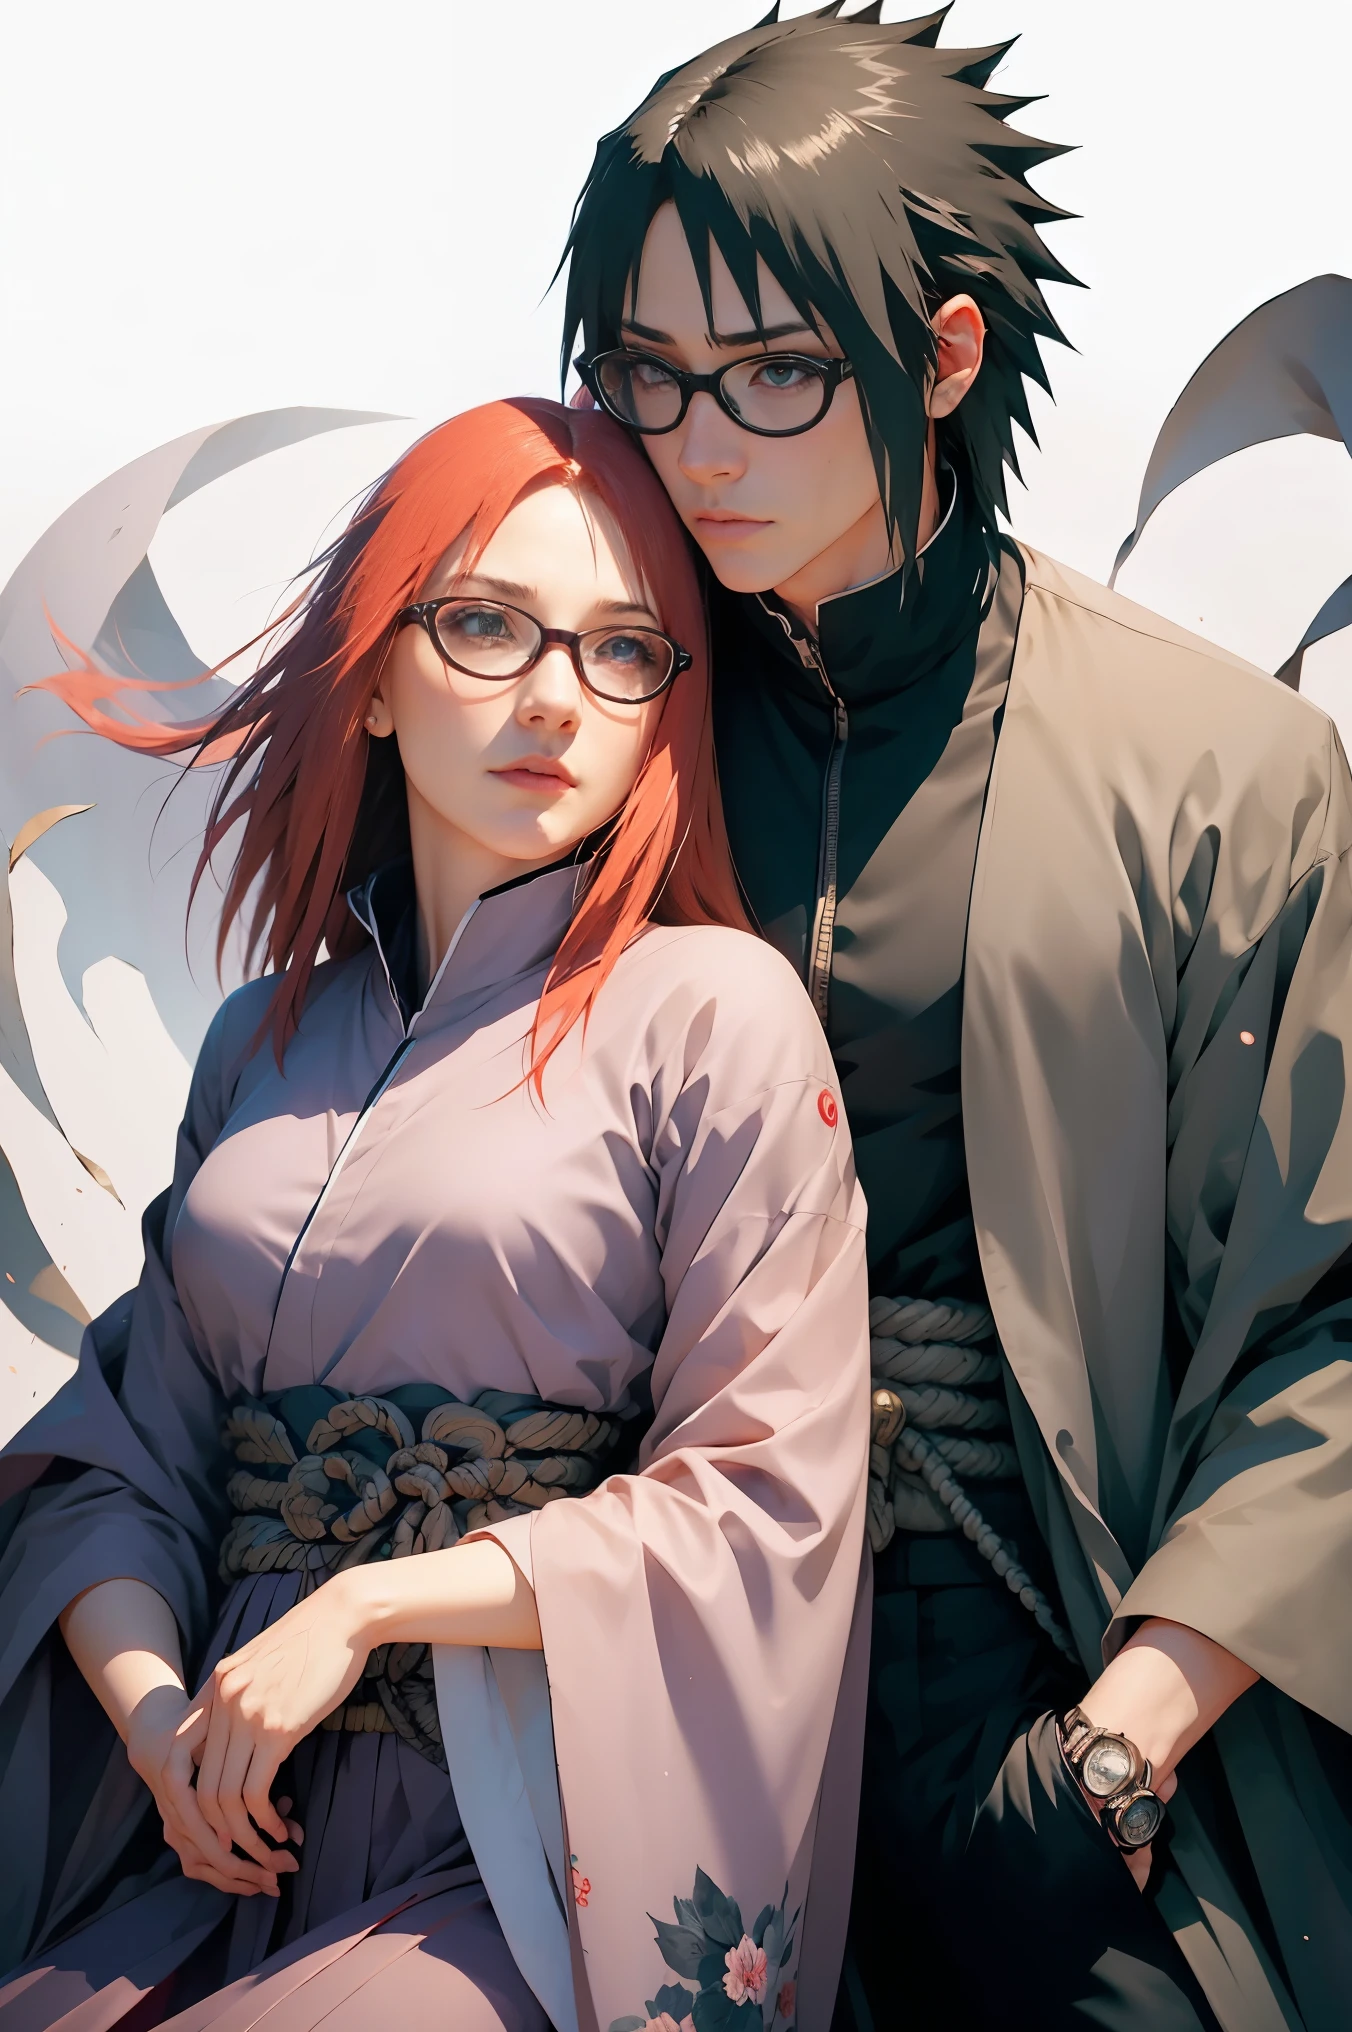 ,1 moon，Romantic couple kissing in the wind，anatomy correct, Delicate pattern，Oriental elements，Ink painting style, Clean colors, red scarletspace, Soft lighting, ( Bokeh)，Masterpiece, Super detailed, Epic composition, Highest quality, 8K，1boy ( Sasuke uchiha with onyx spikes in a dark blue outfit, 1girl (Karin Uzumaki beautiful face, with beautiful dark red hair, red eyes, glasses, in a purple outfit.)